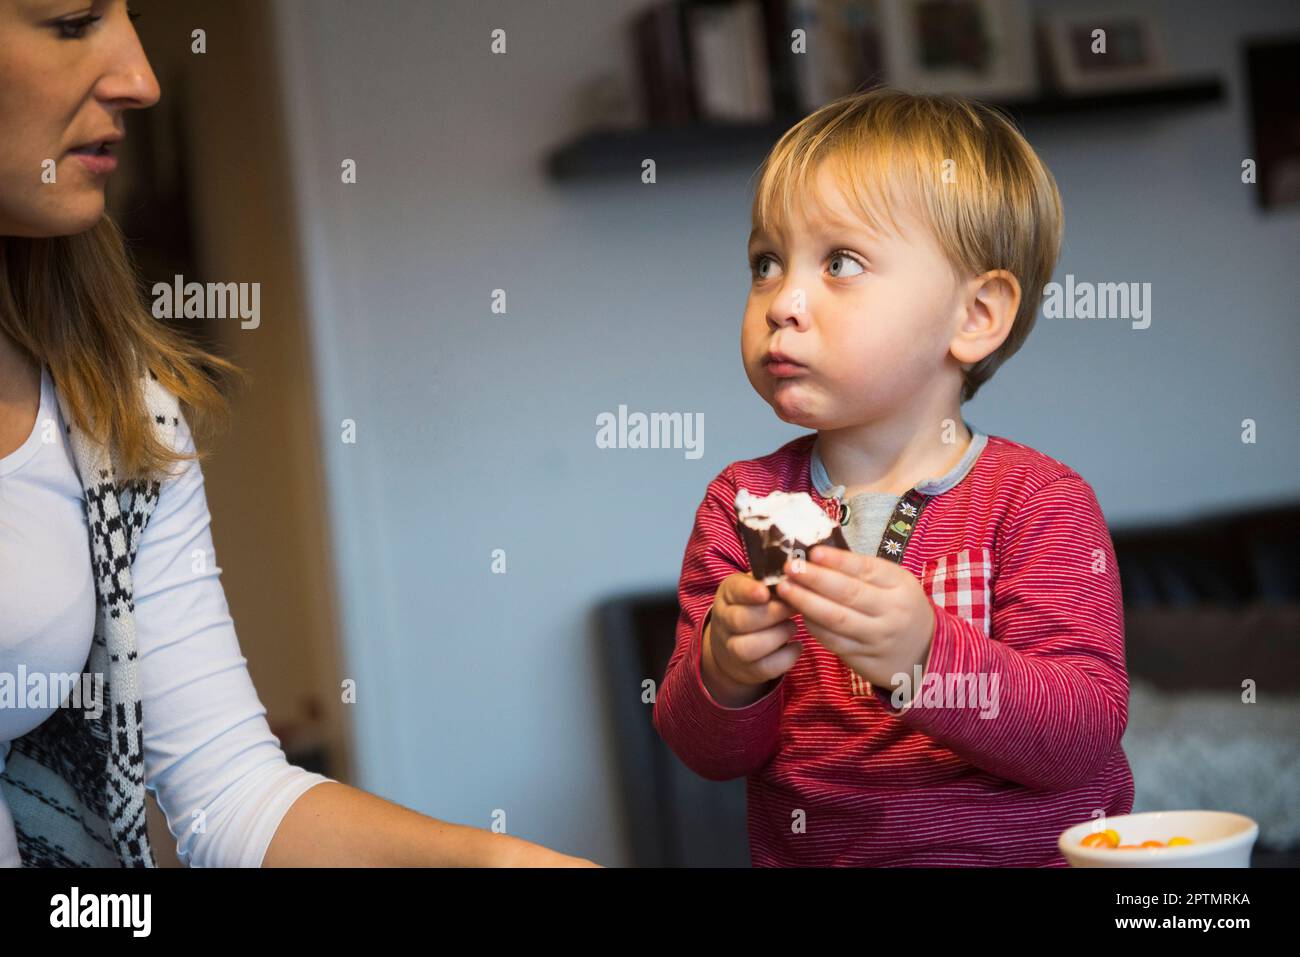 Little boy looking at his mother while eating pastry, Munich, Germany Stock Photo